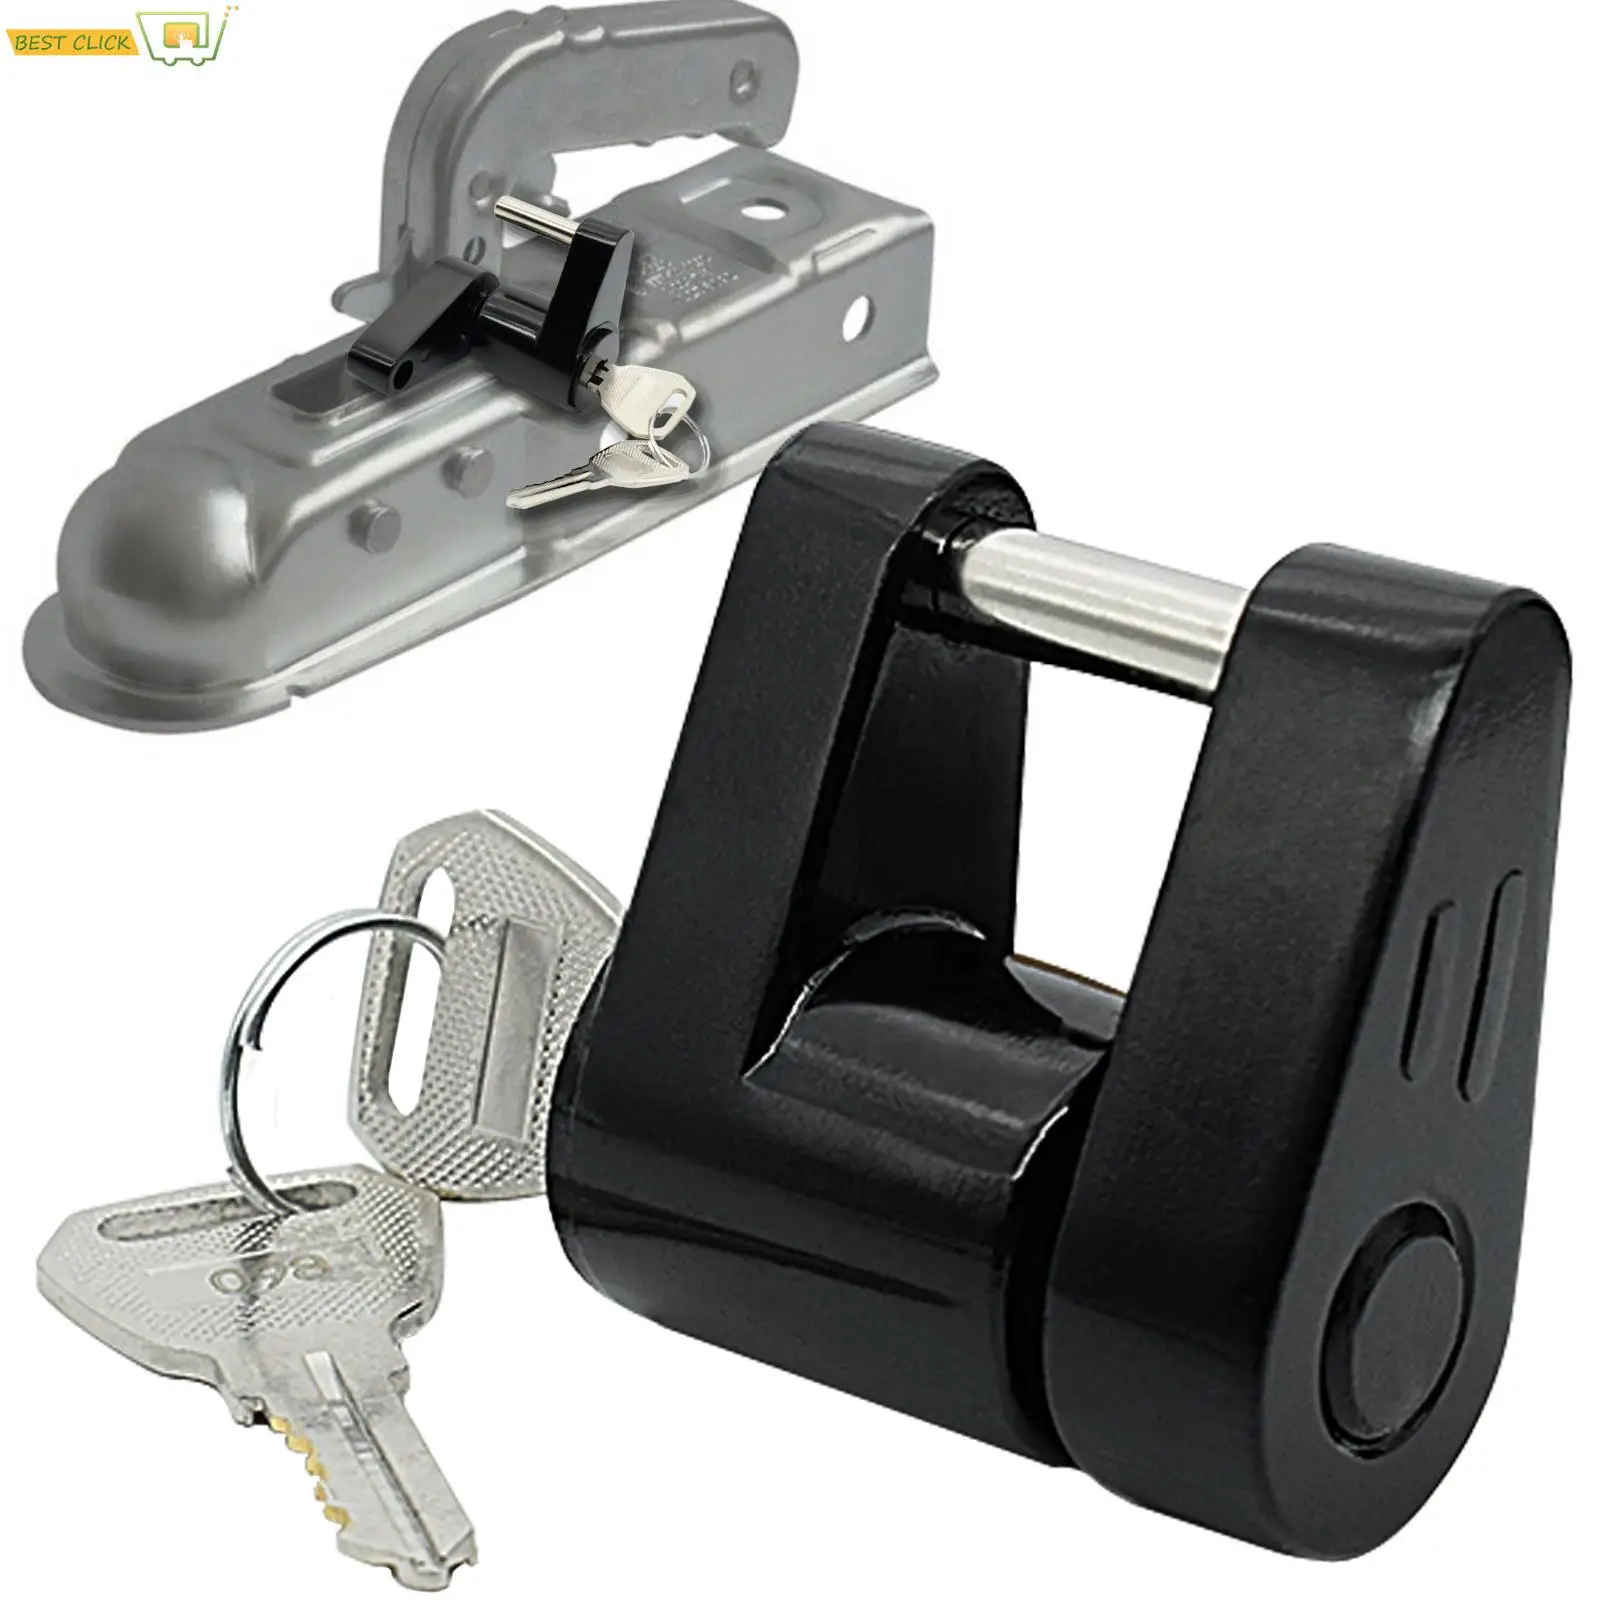 

Durable Trailer Hitch Coupler Heavy-Duty Padlock Hook Lock Rust-resistance Anti-theft Tongue Locks Hitch Security Protector